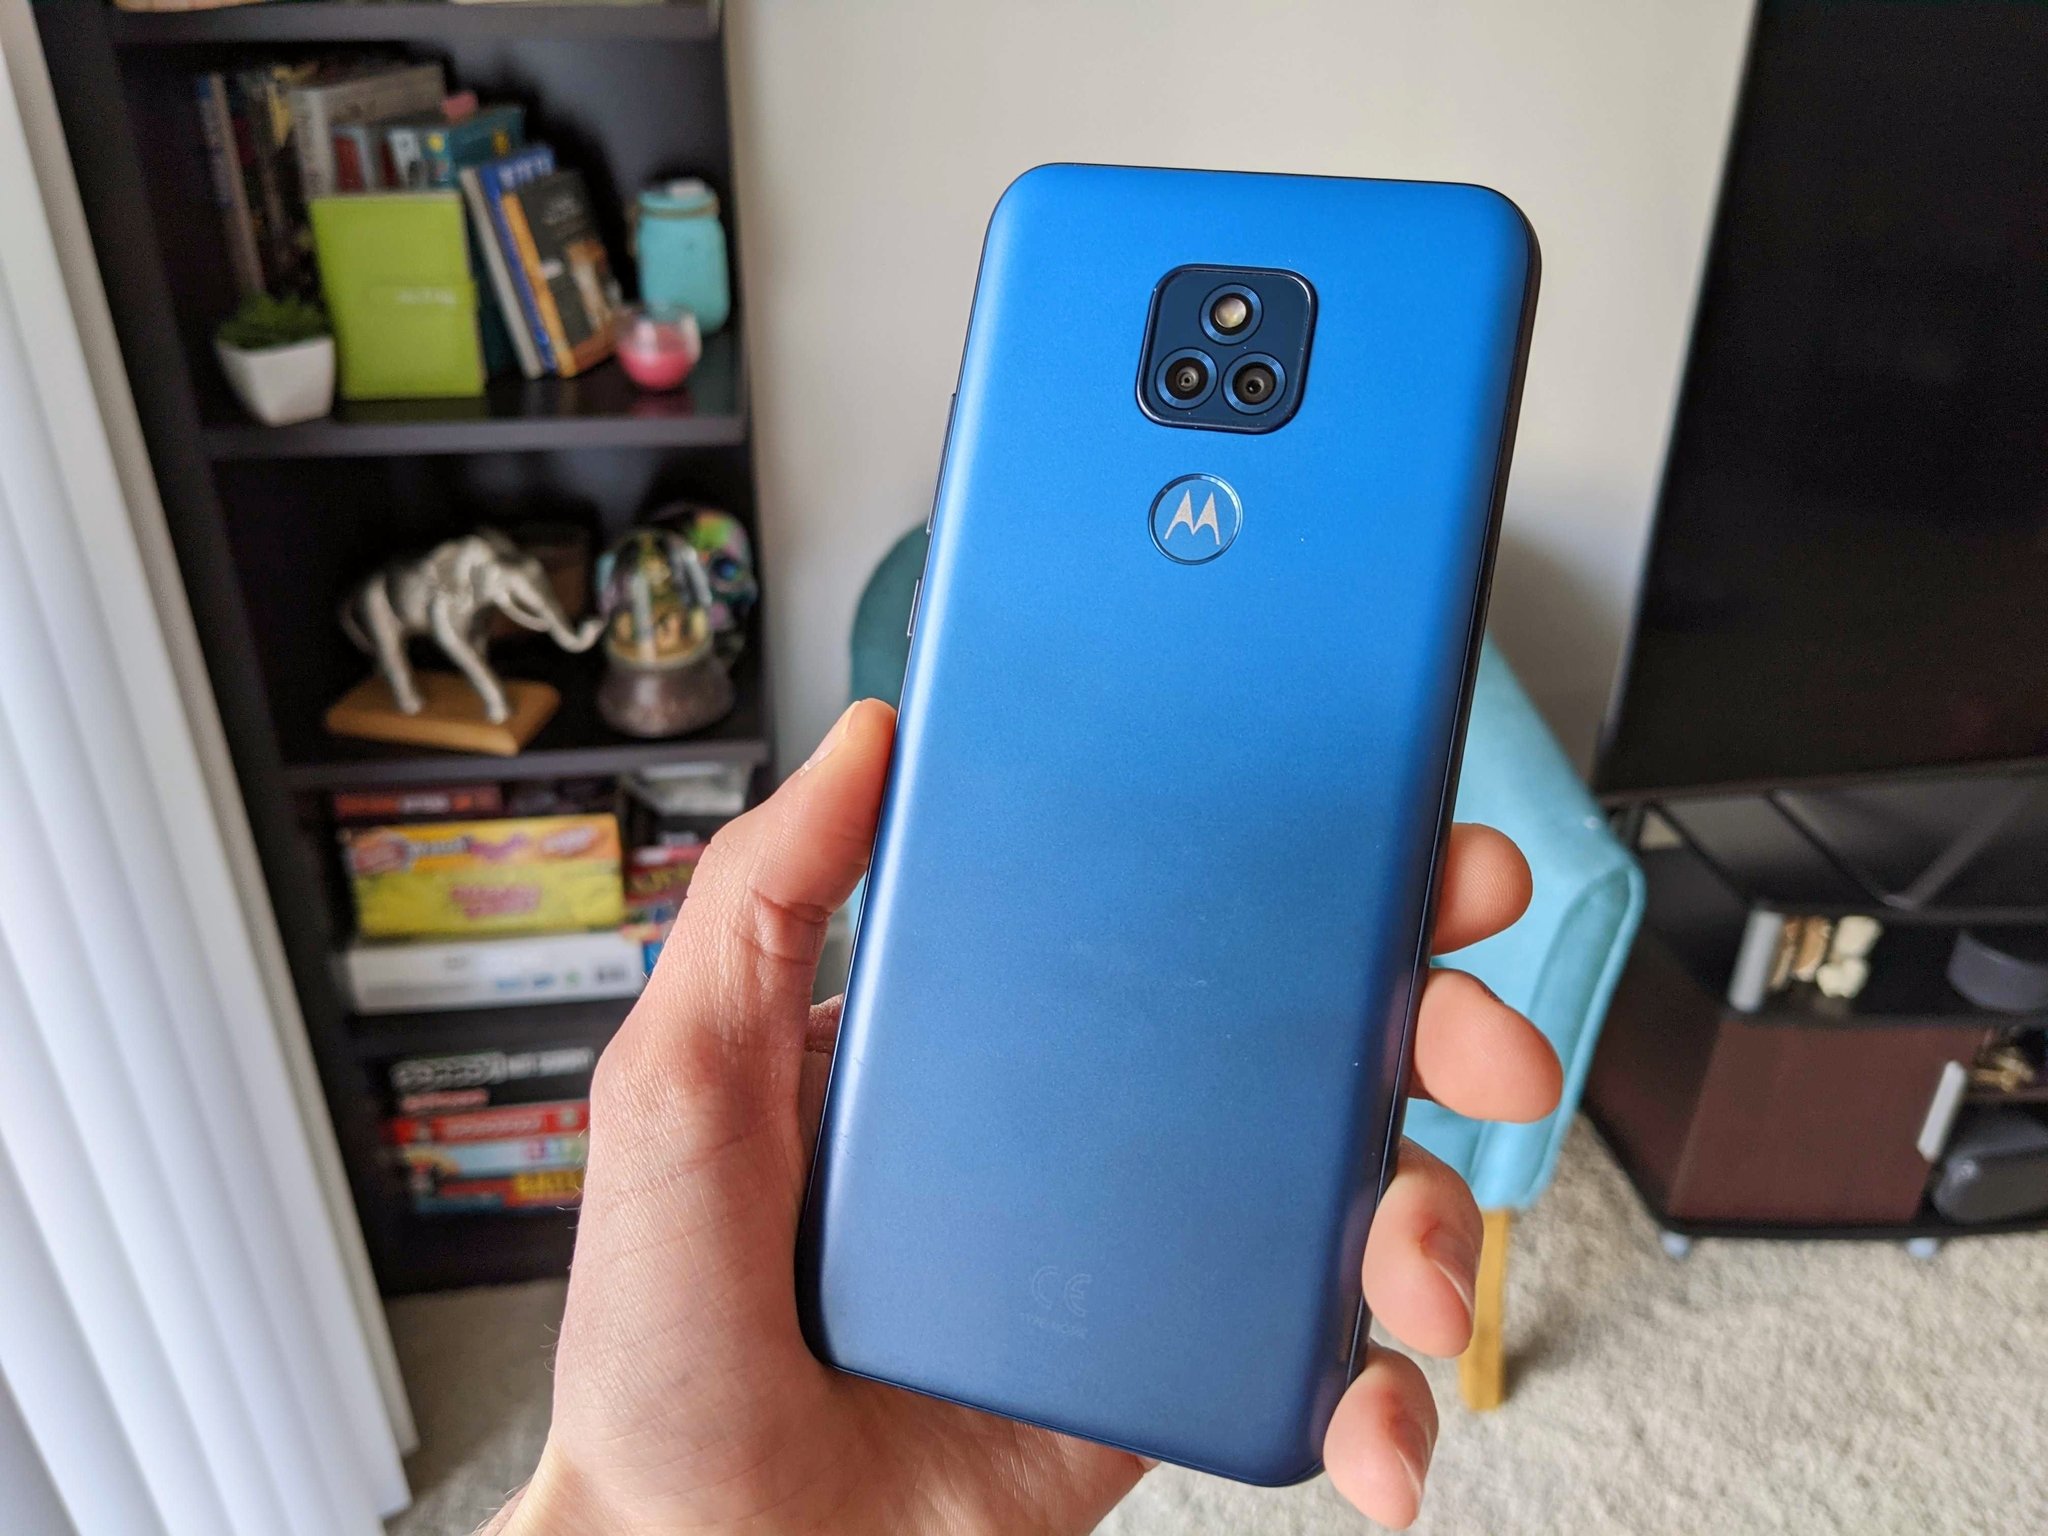 The 7 Best Moto G4 Play Cases